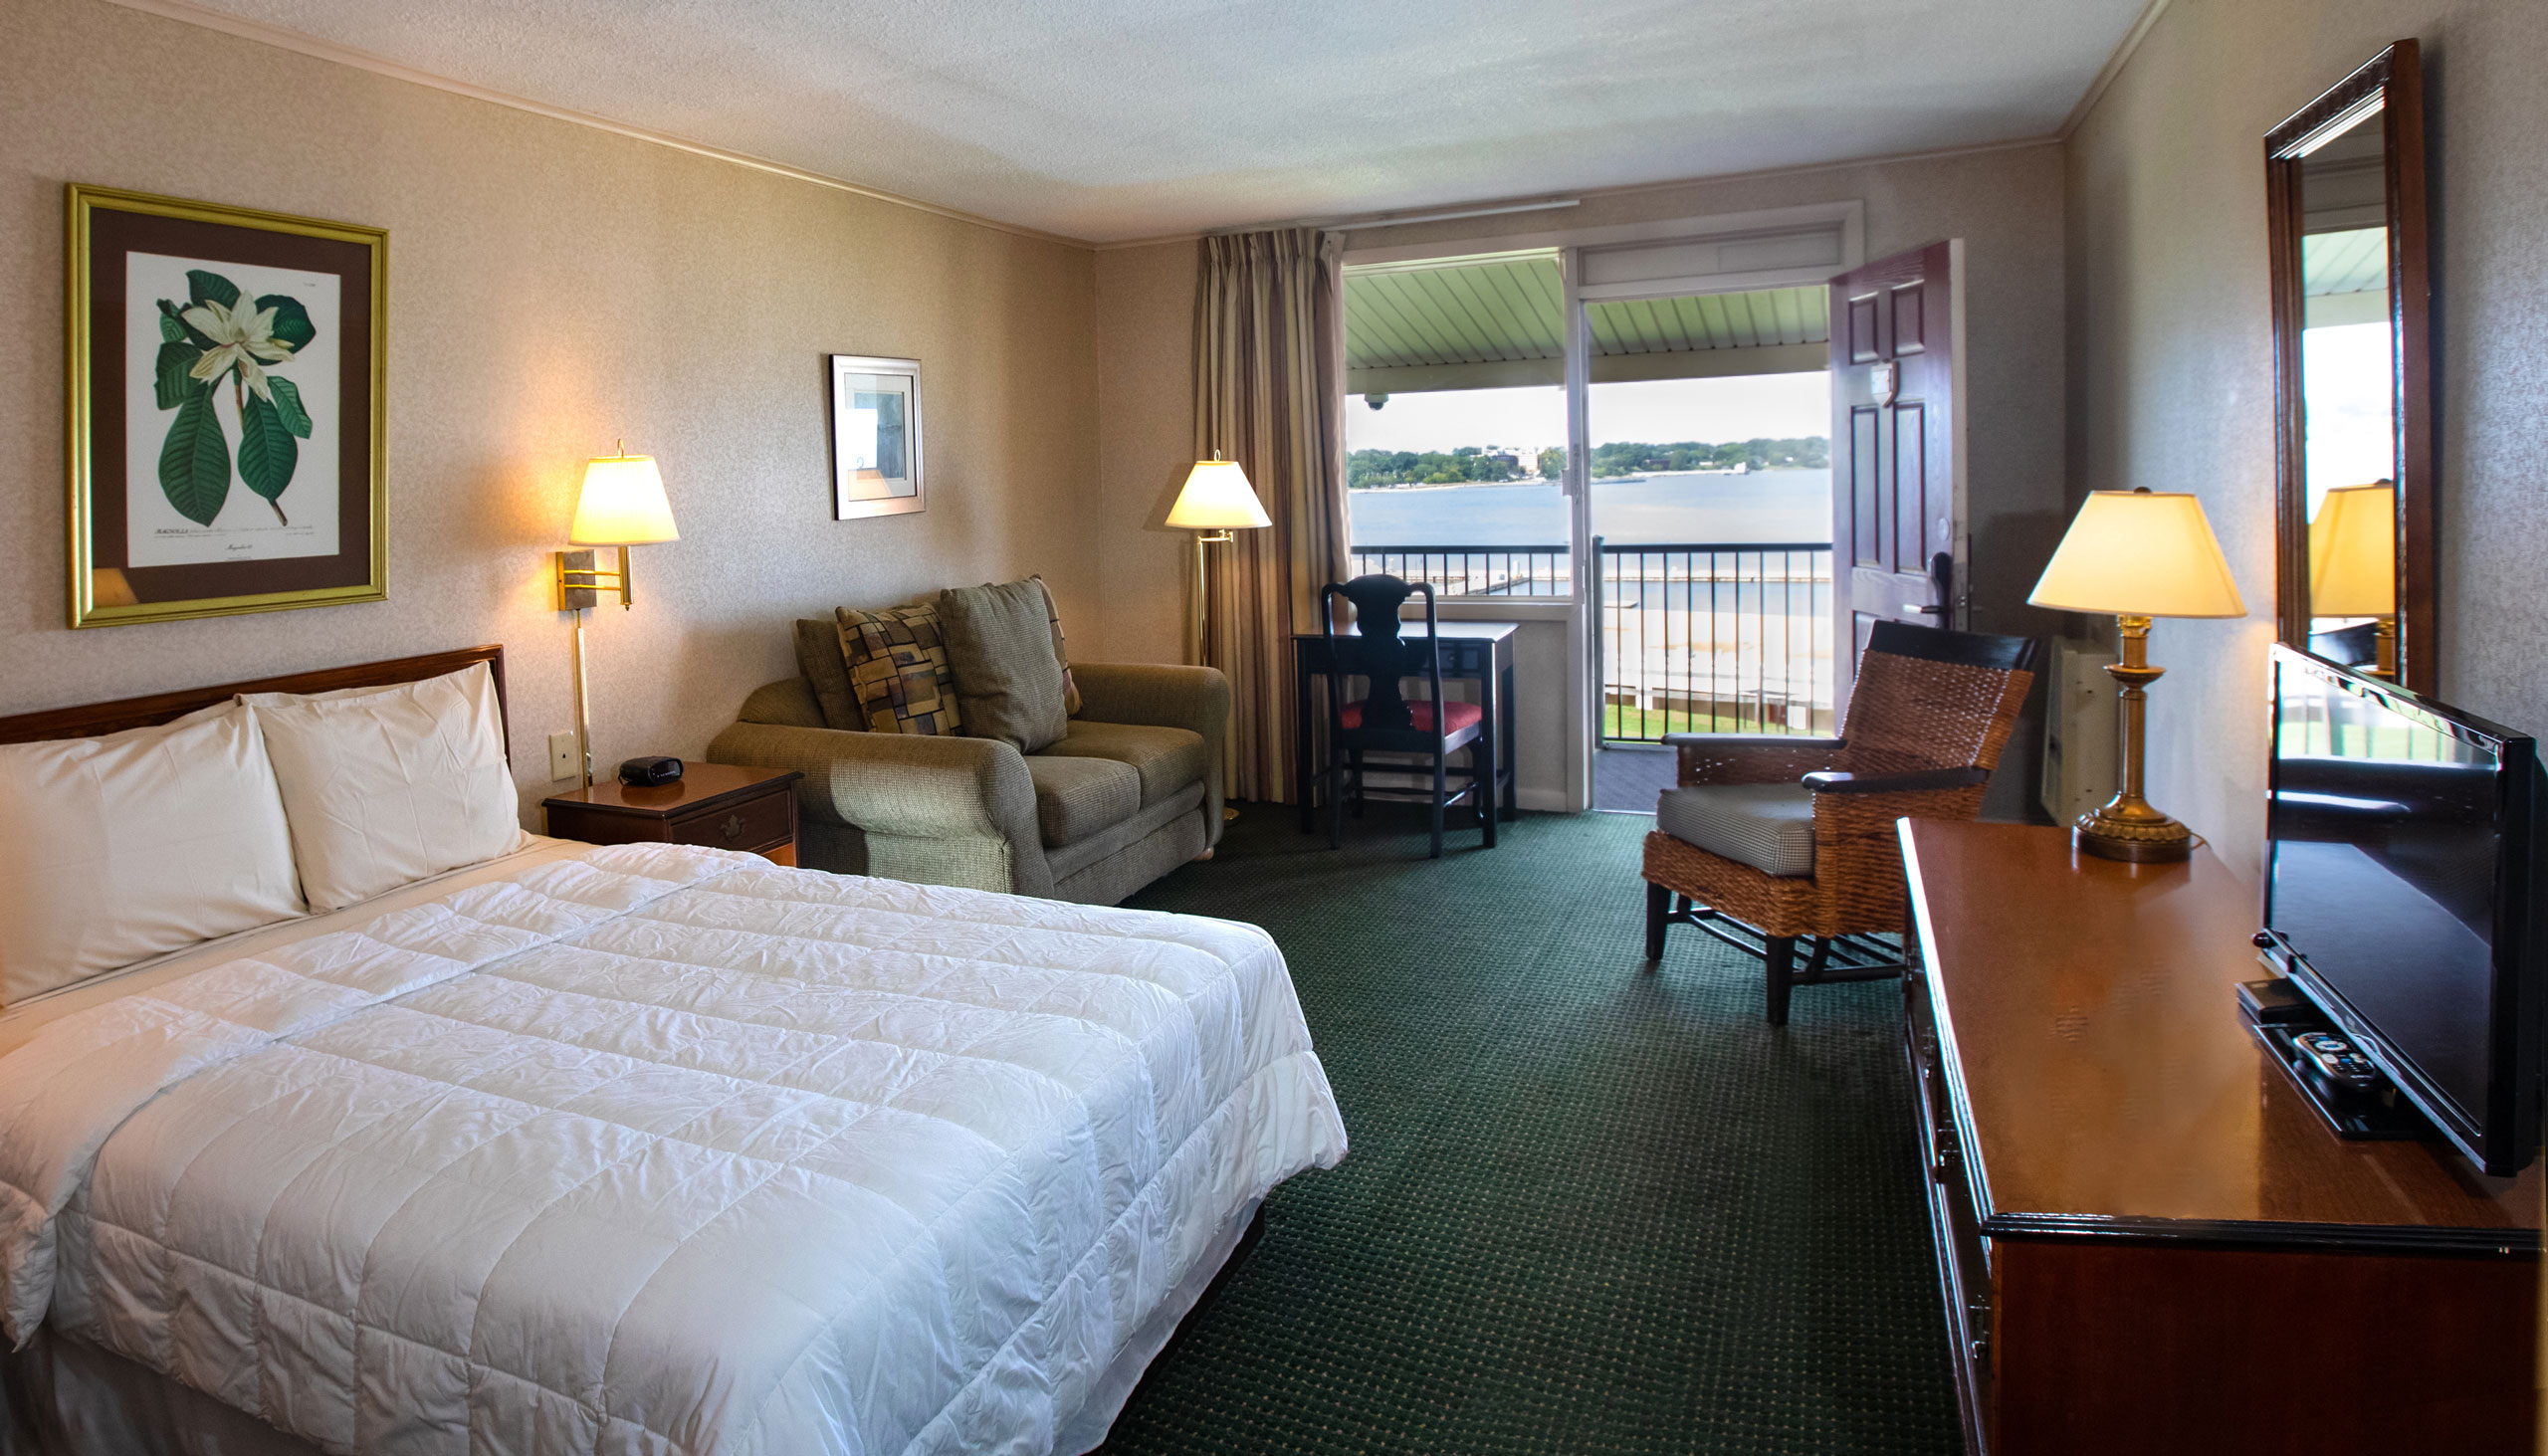 A spacious Yorktown hotel room with colonial green carpet, a queen bed, a love seat, desk, and terrace.